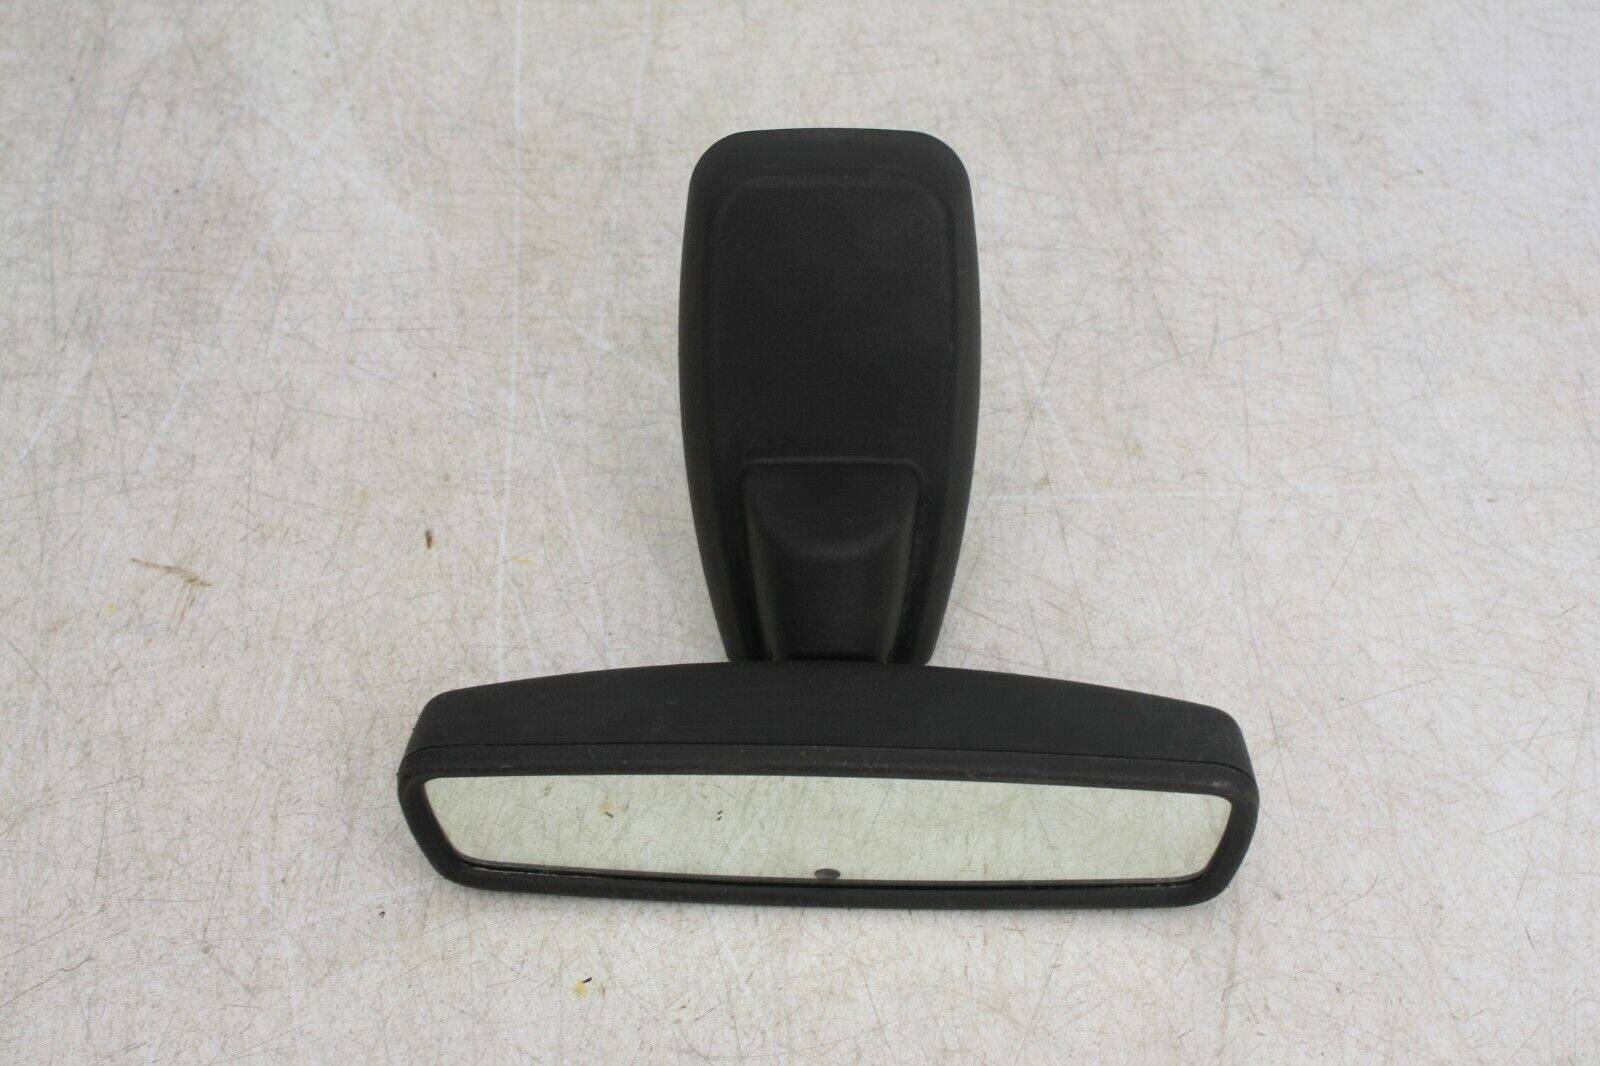 Ford-Fiesta-Electric-Dimming-Rear-View-Interior-Mirror-8A61-17D568-ABW-Genuine-175367530606